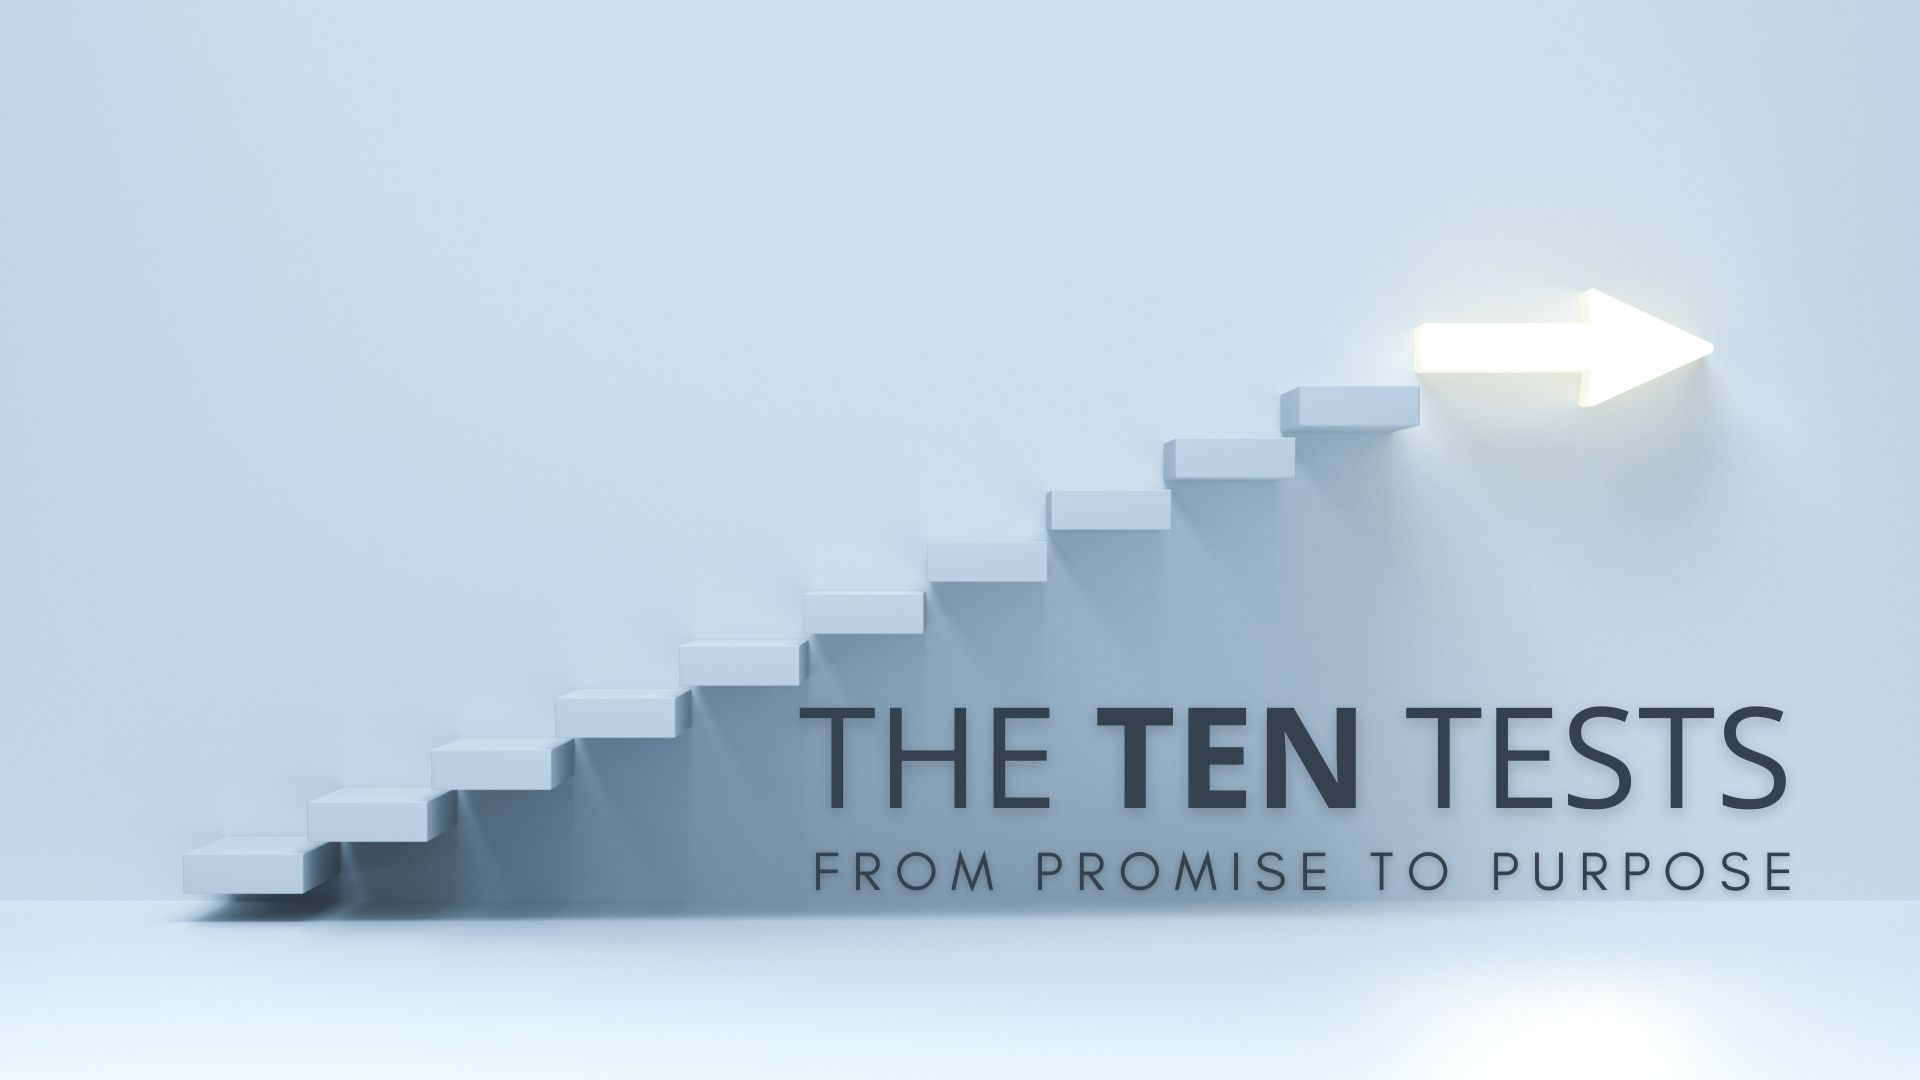 The TEN Tests: From Promise to Purpose - The Prosperity Test